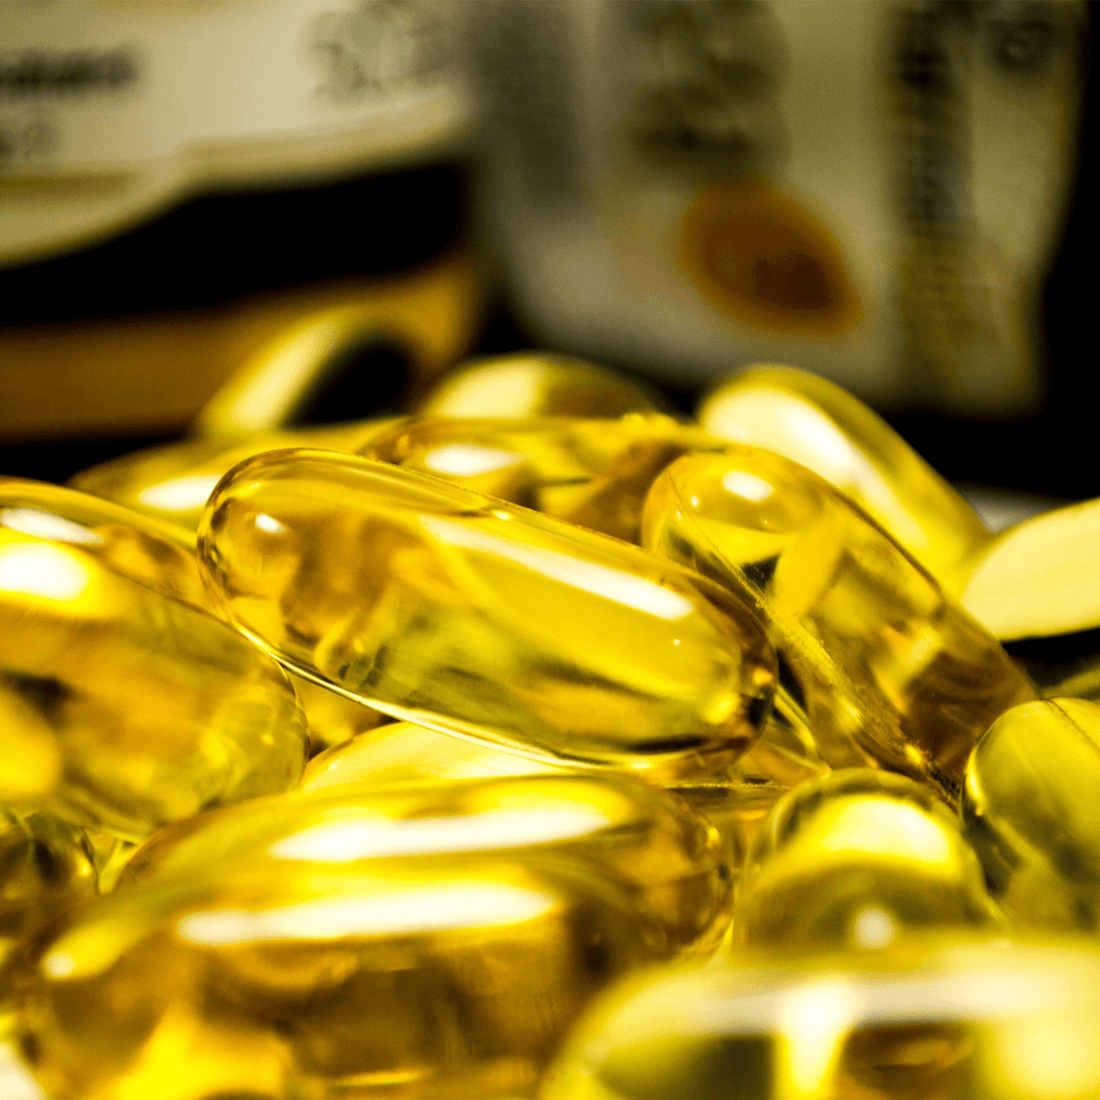 Omega 3 Fish Oil Benefits and Uses - Fitness Health 